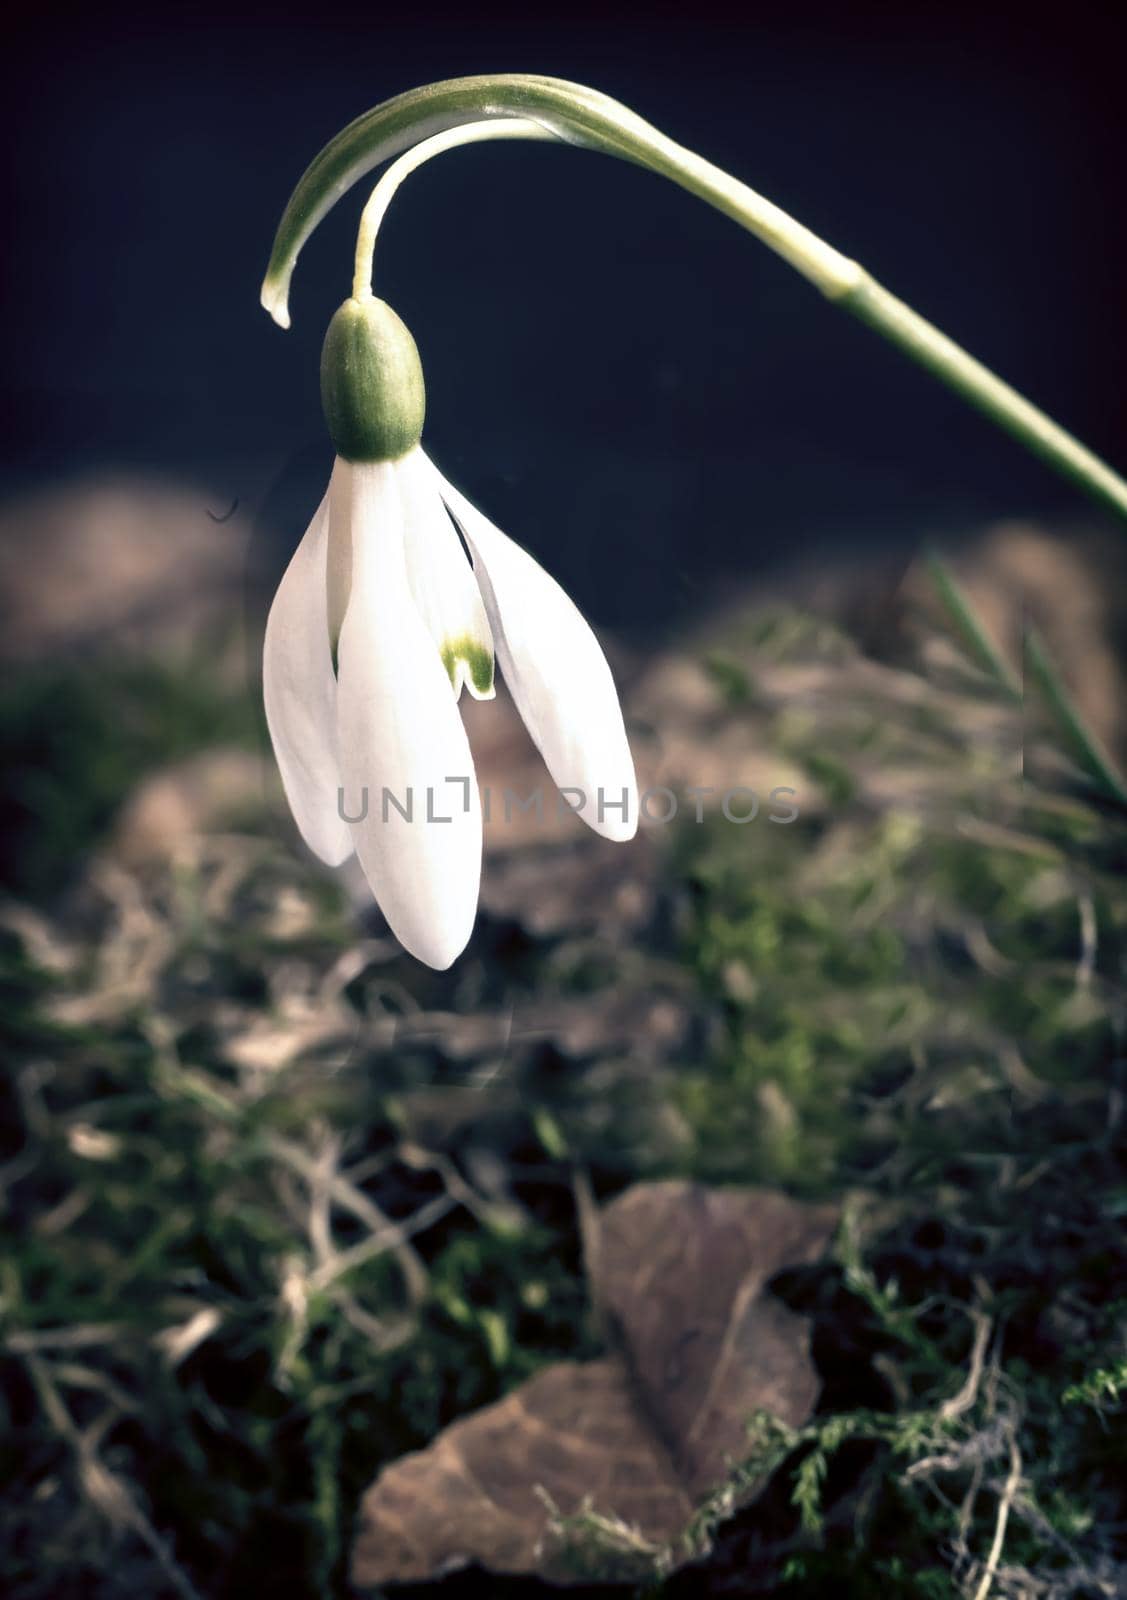 White snowdrop flower among last year's moss and fallen leaves. Presented on a dark background.